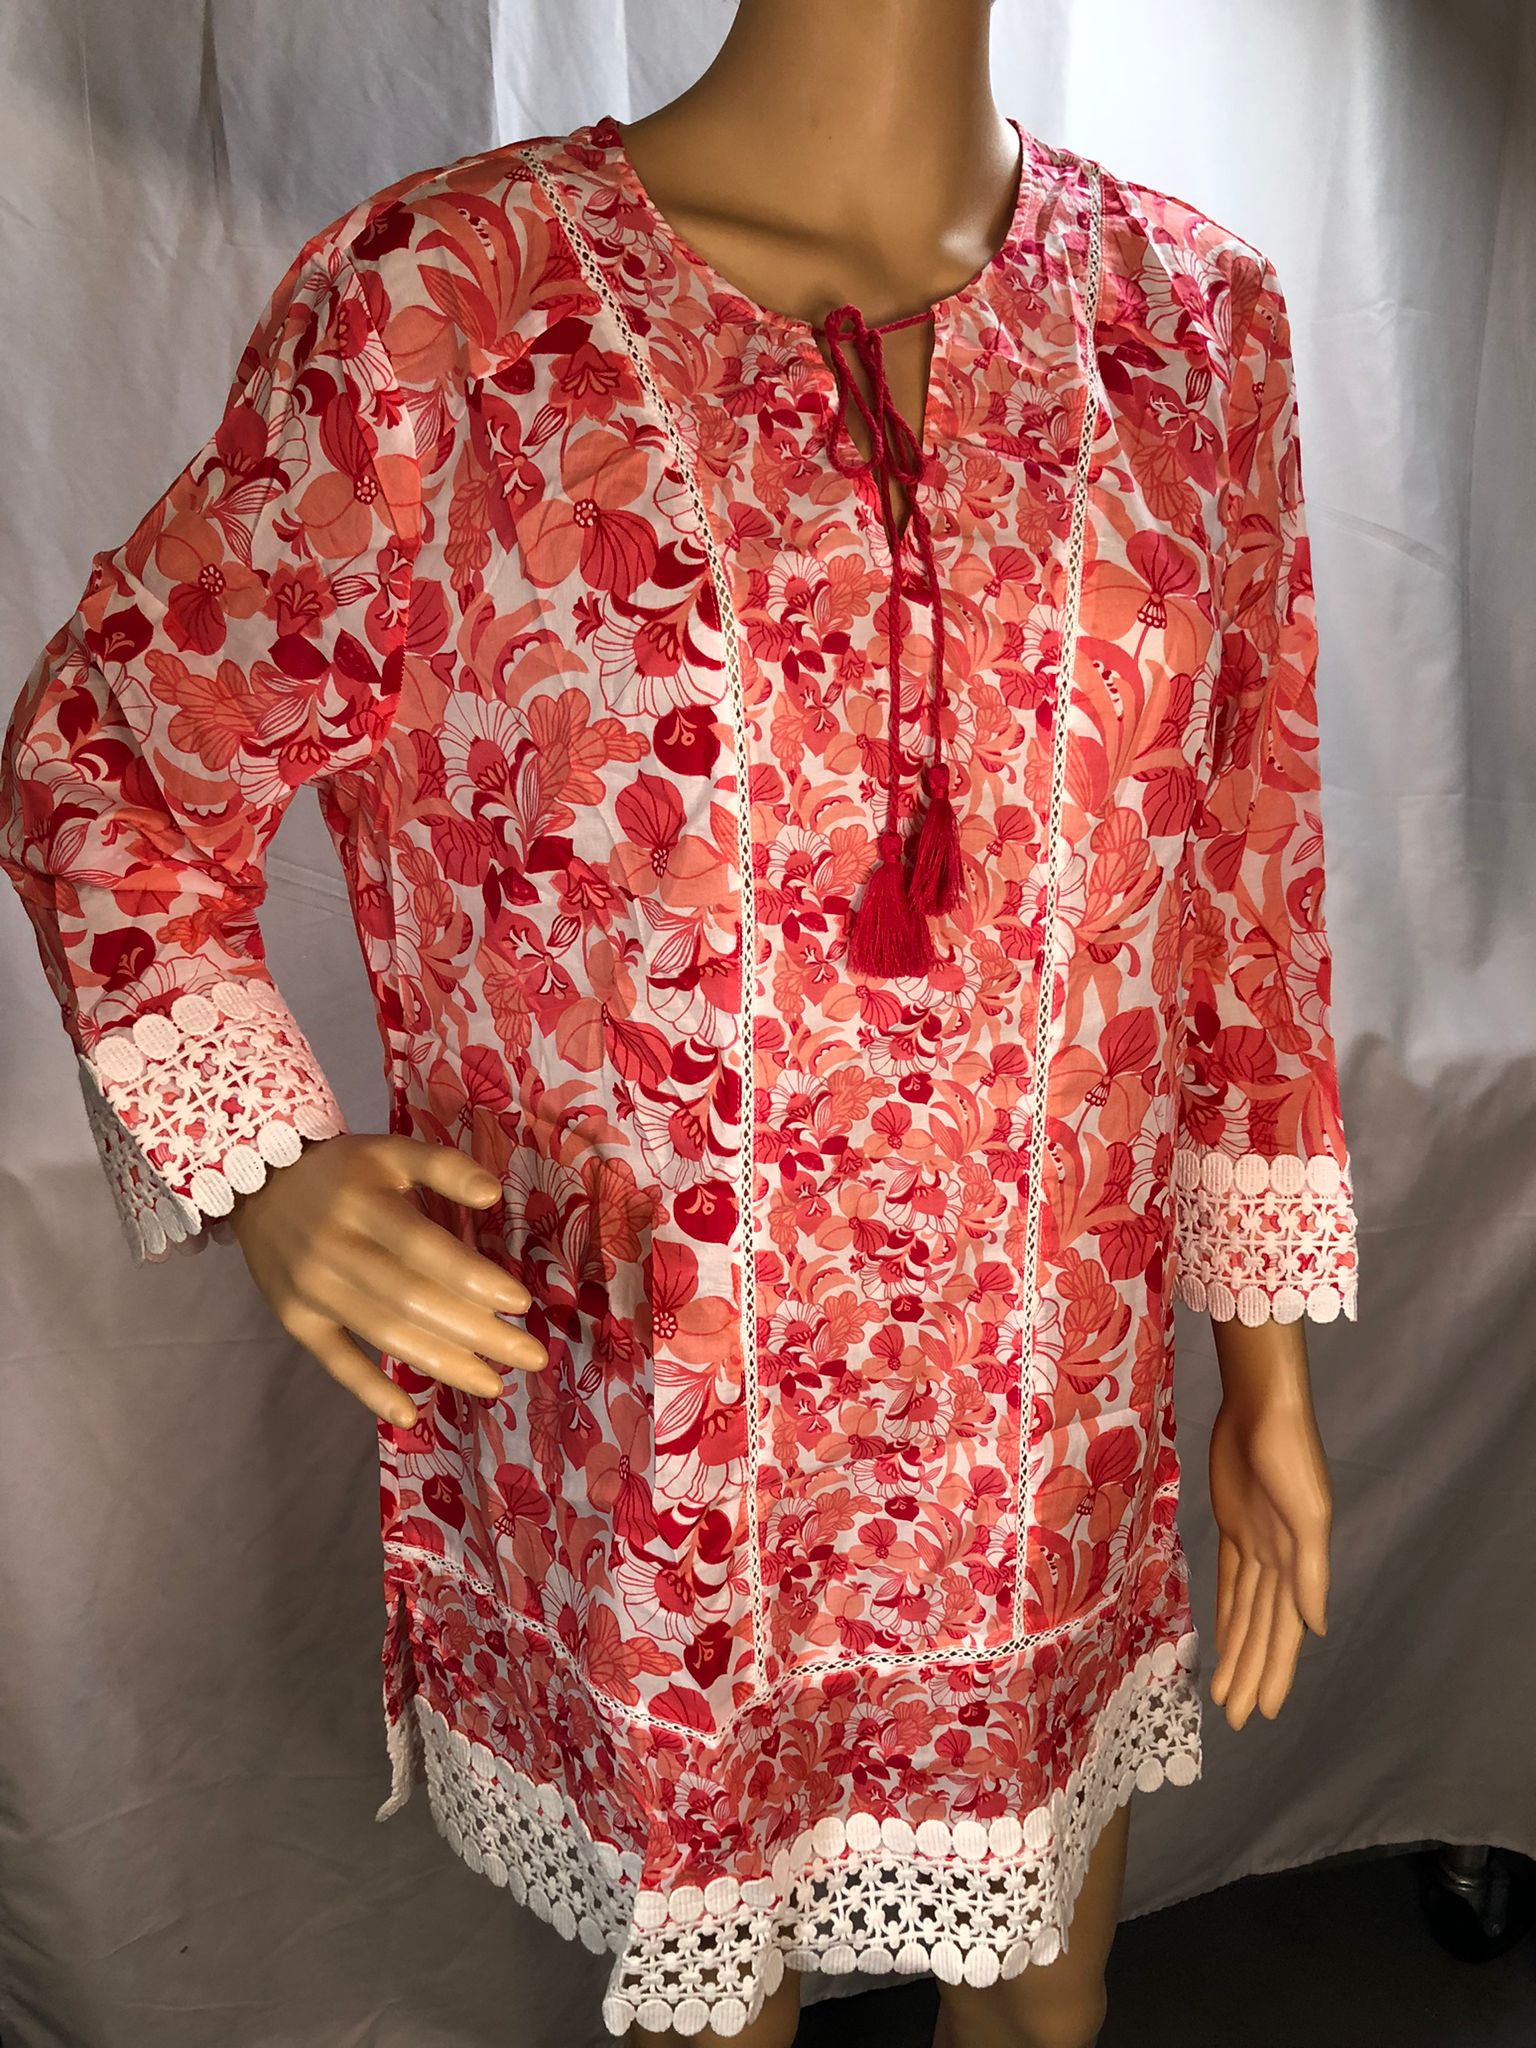 C. Wonder Printed 3/4 Sleeve Woven Tunic with Lace Trim Details